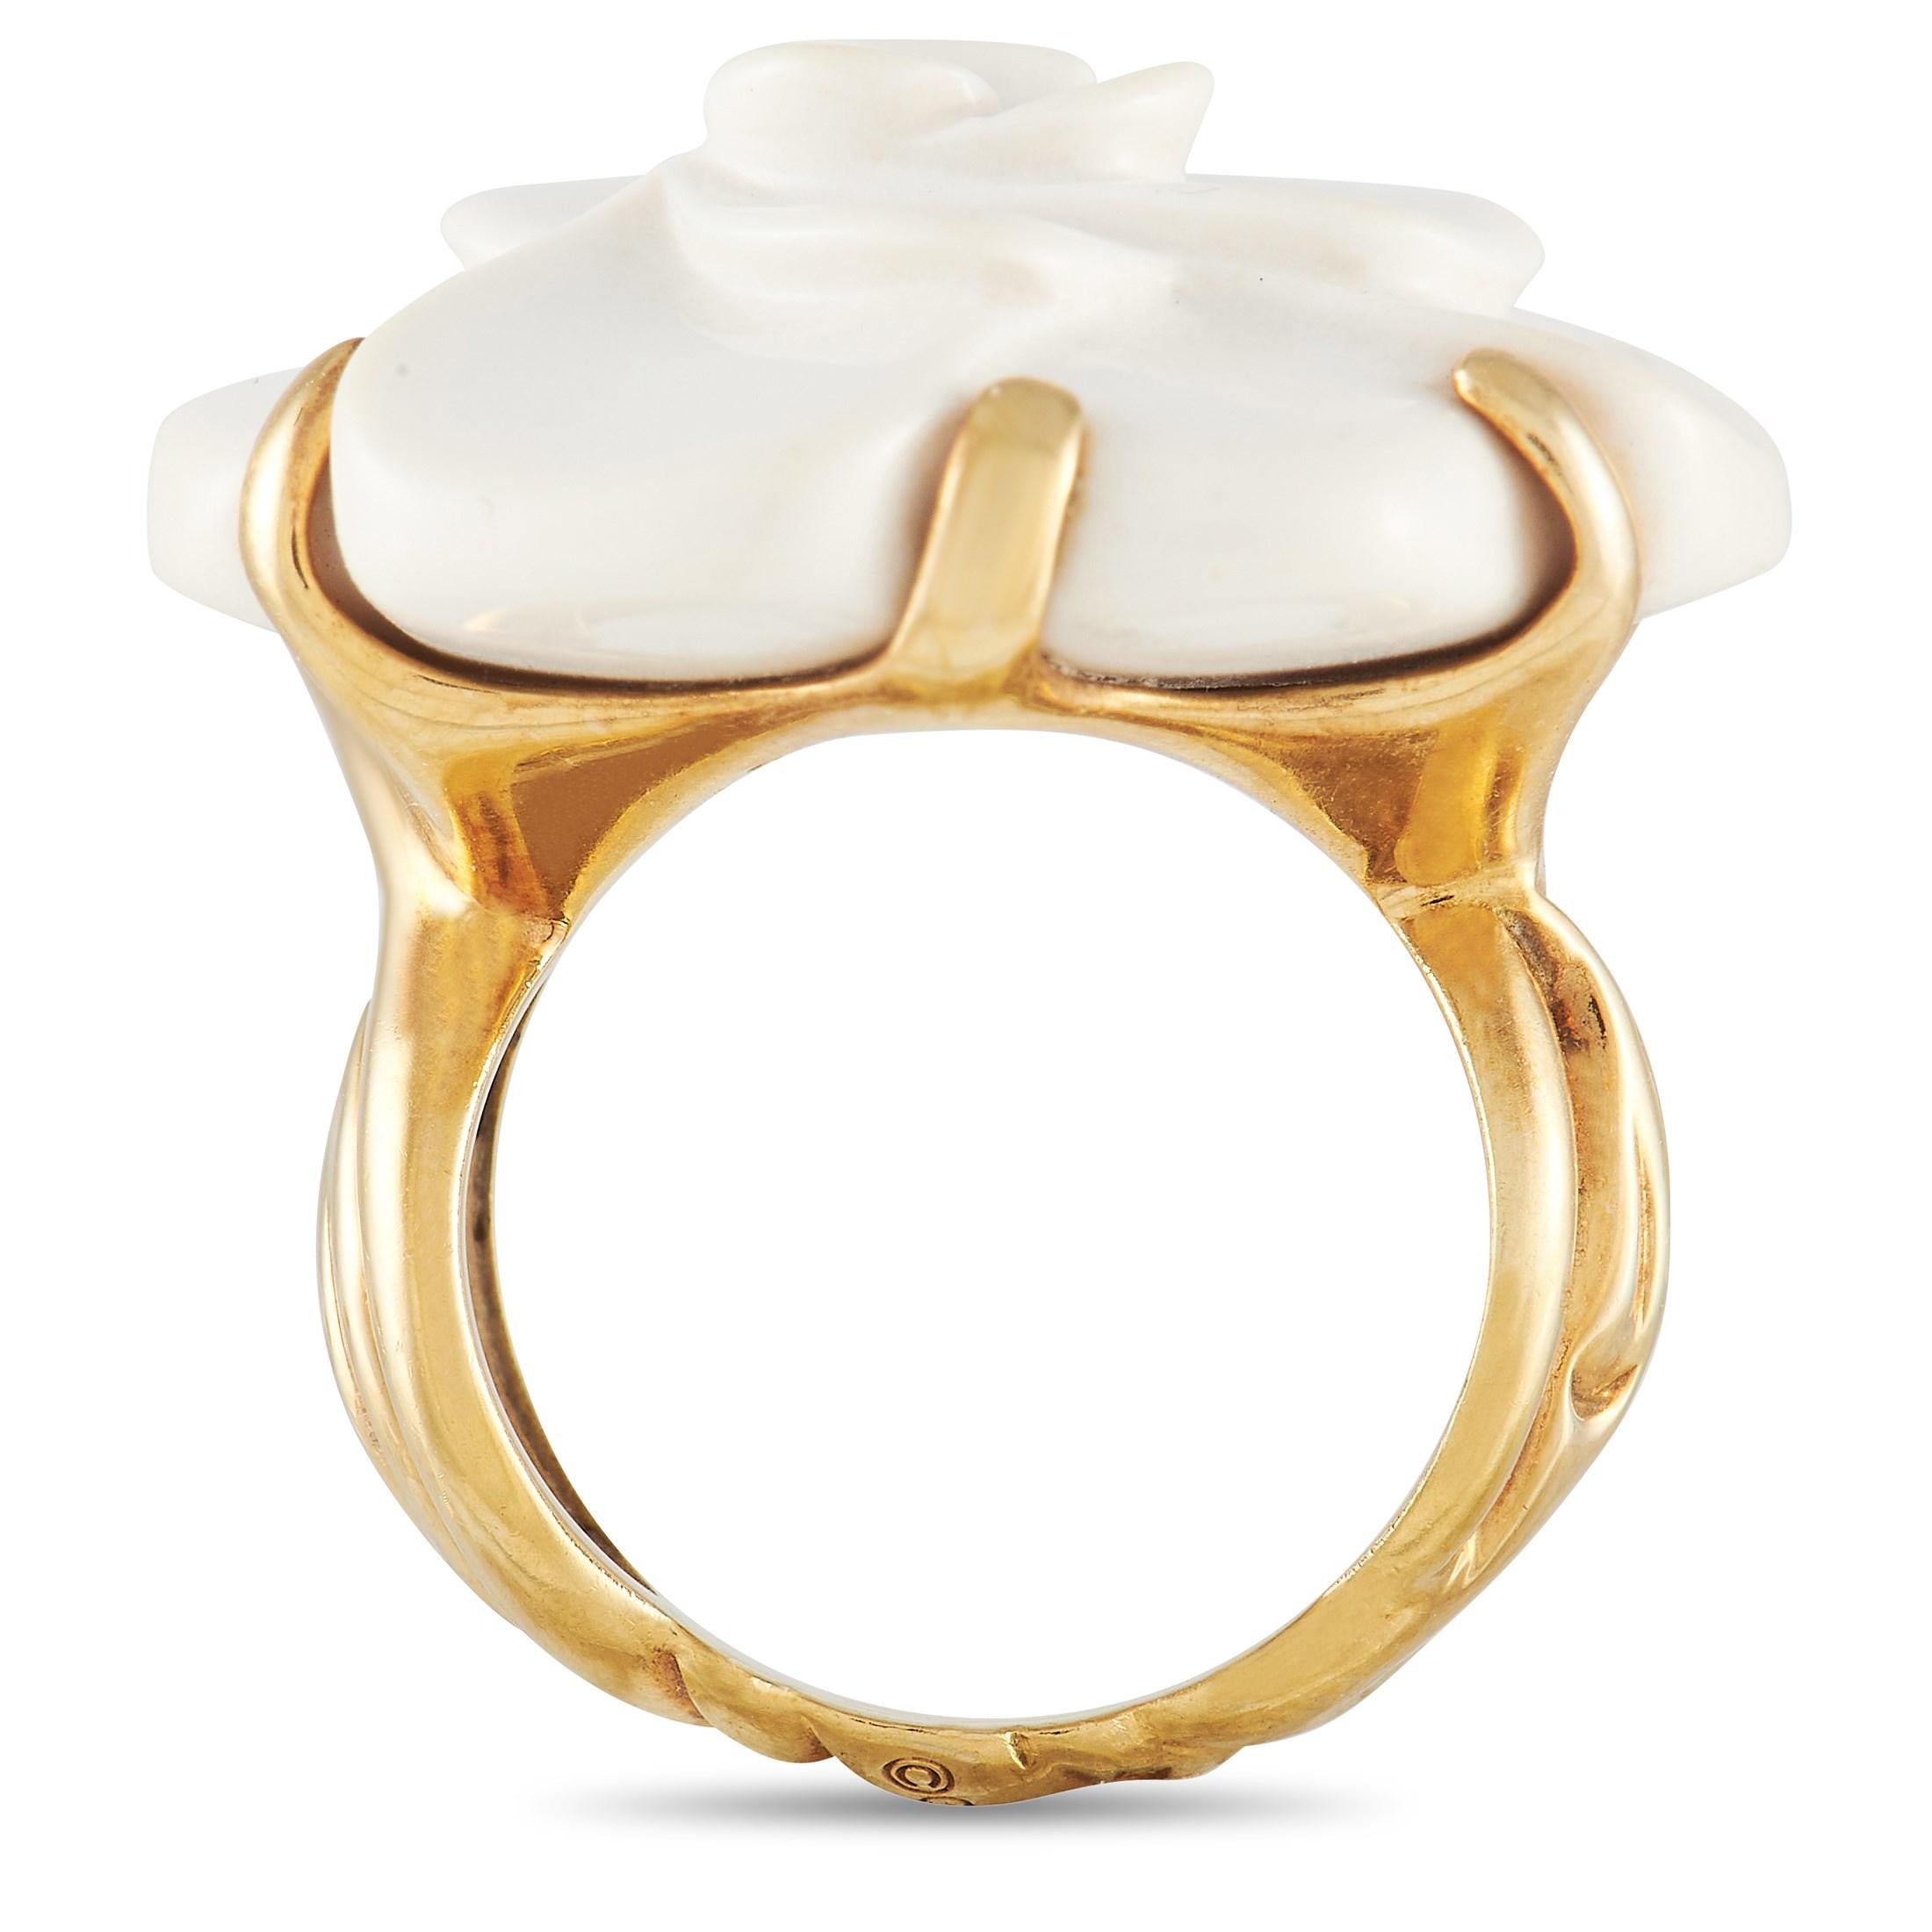 It doesn’t get any more chic or sophisticated than this Chanel Camelia ring. A matte White Agate floral motif makes a statement at the center of the simple, opulent 18K Yellow Gold setting. This piece features a textured band measuring 8mm wide and